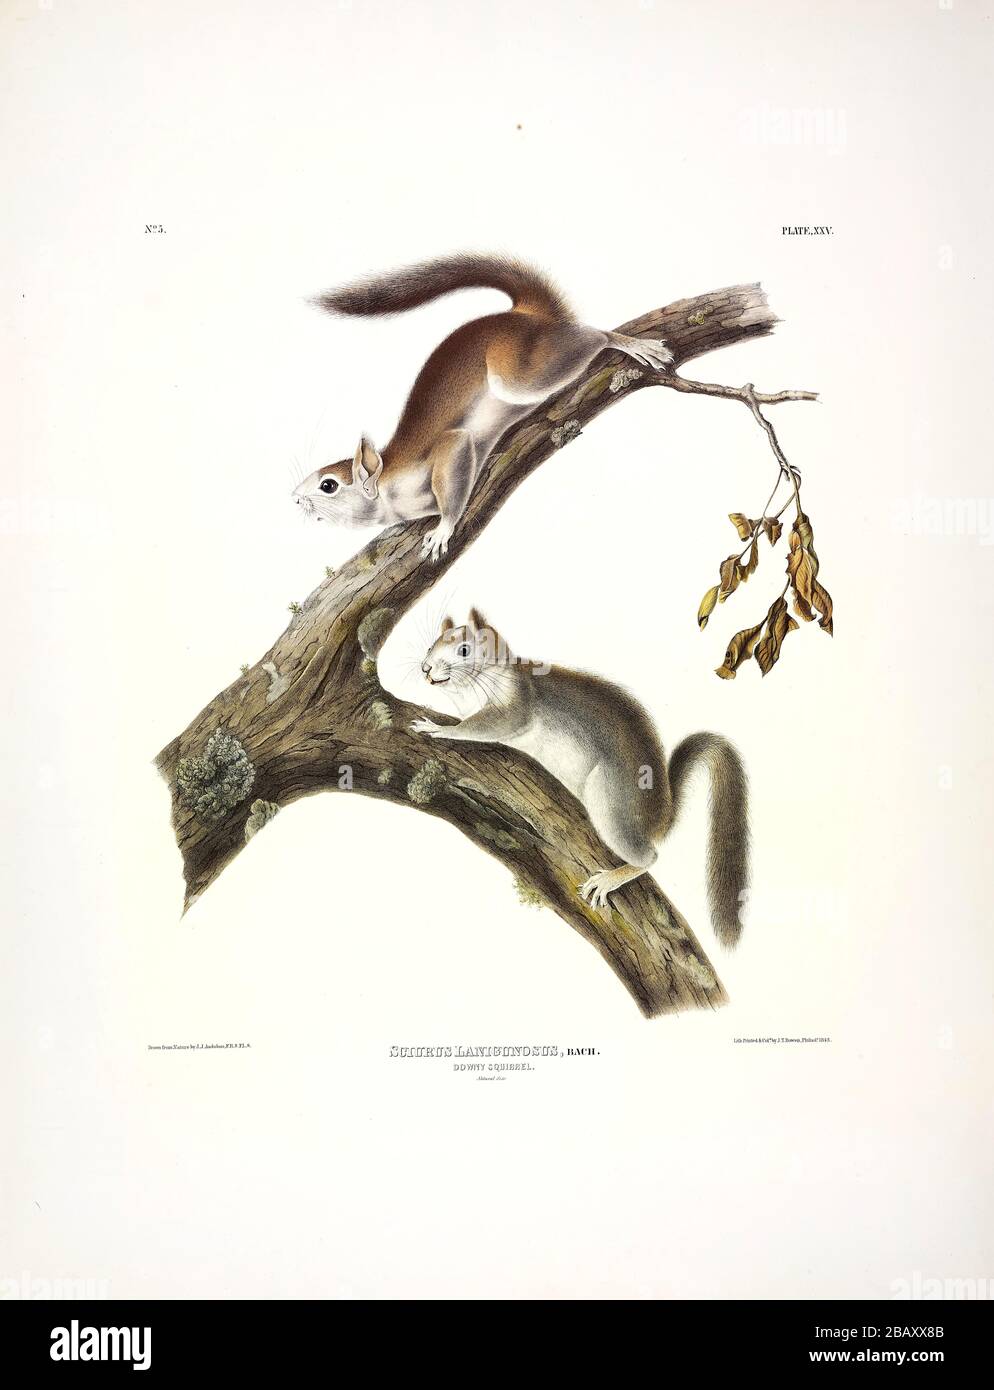 Plate 25 Downy Squirrel (American Red Squirrel) The Viviparous Quadrupeds of North America, John James Audubon, Very high resolution and quality image Stock Photo